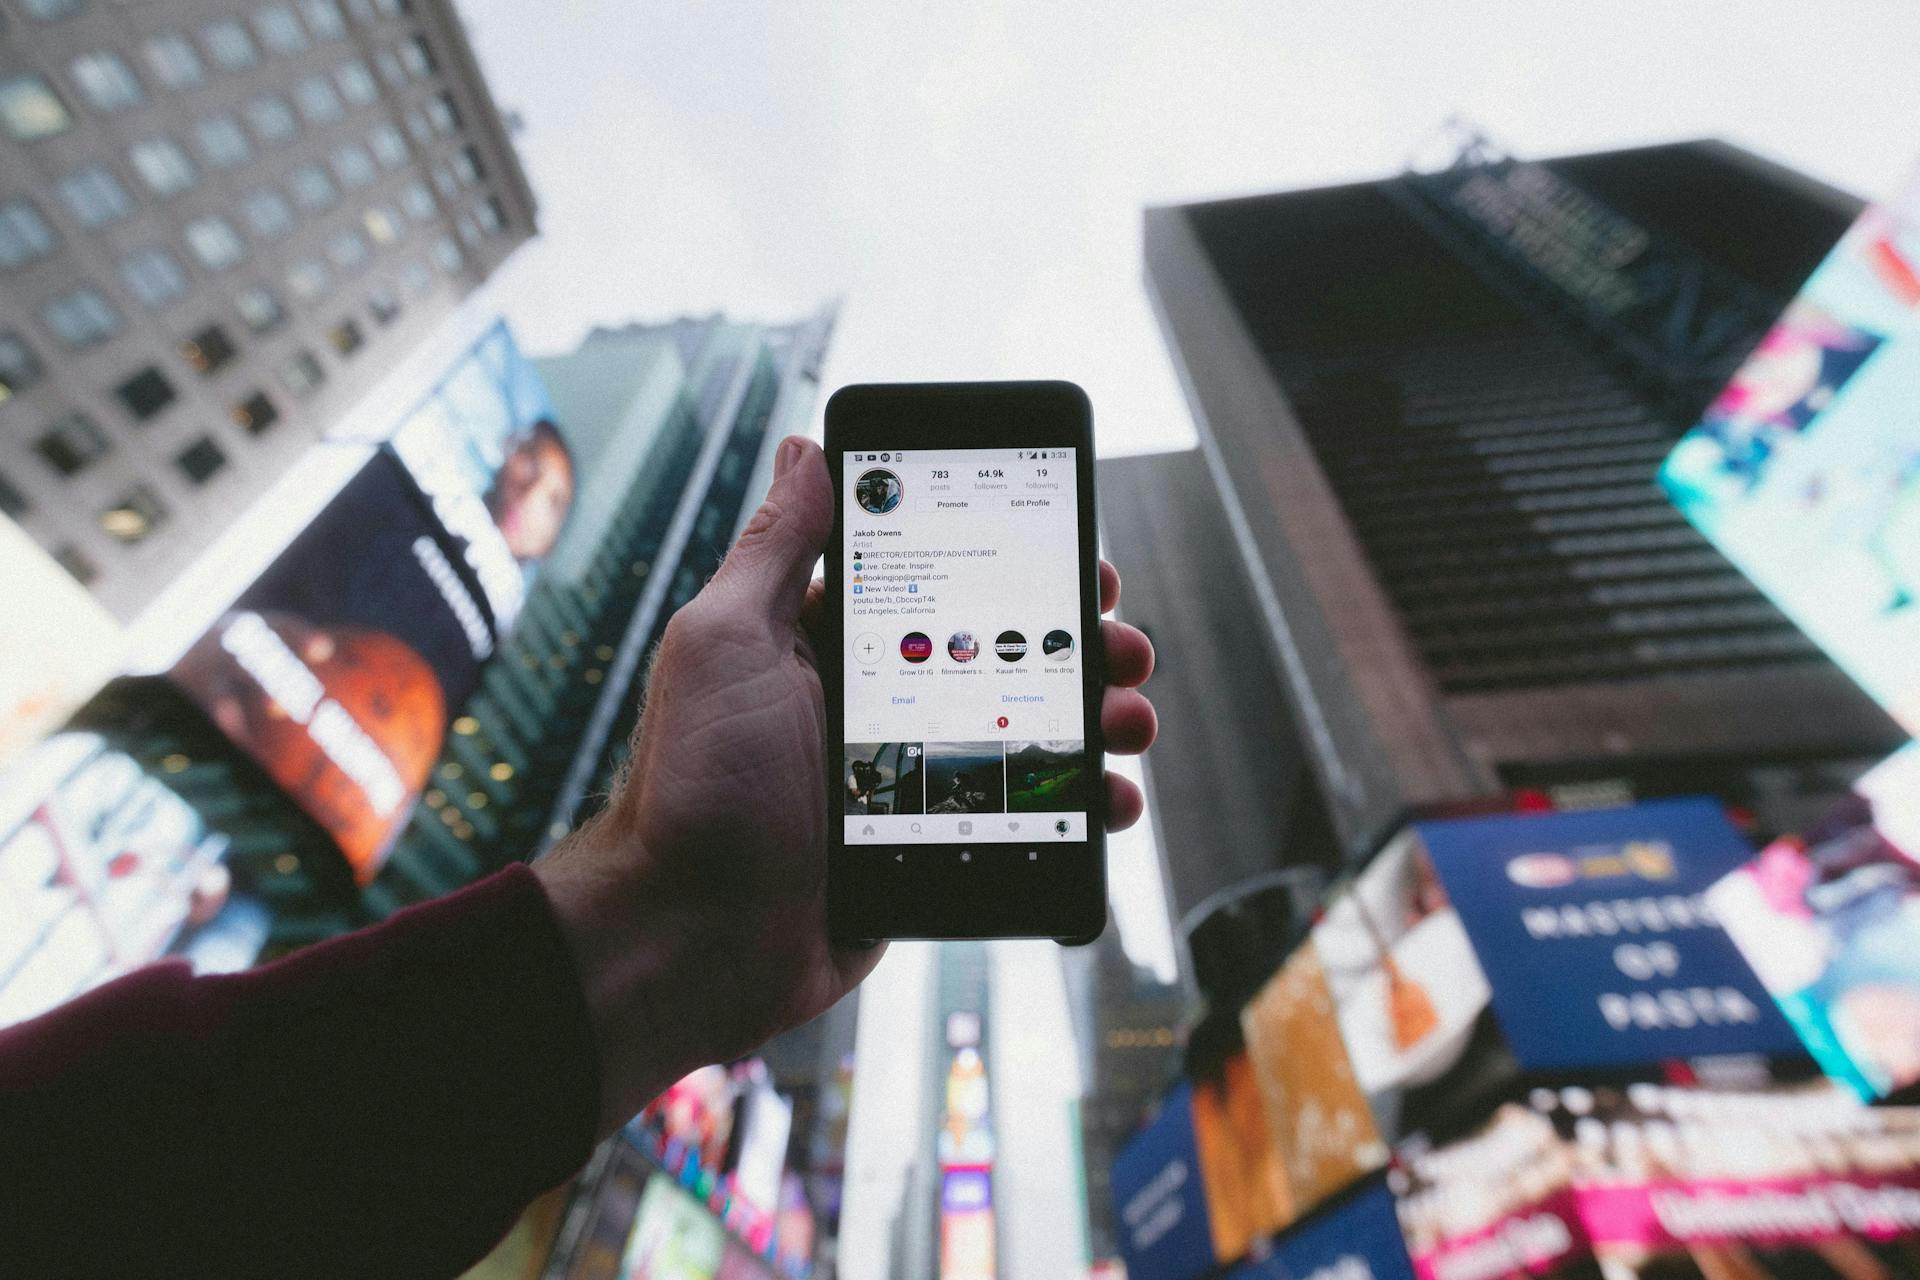 An image of a phone tilted up toward the sky in Times Square of New York City. The phone is opened to the social meida platform Instagram.